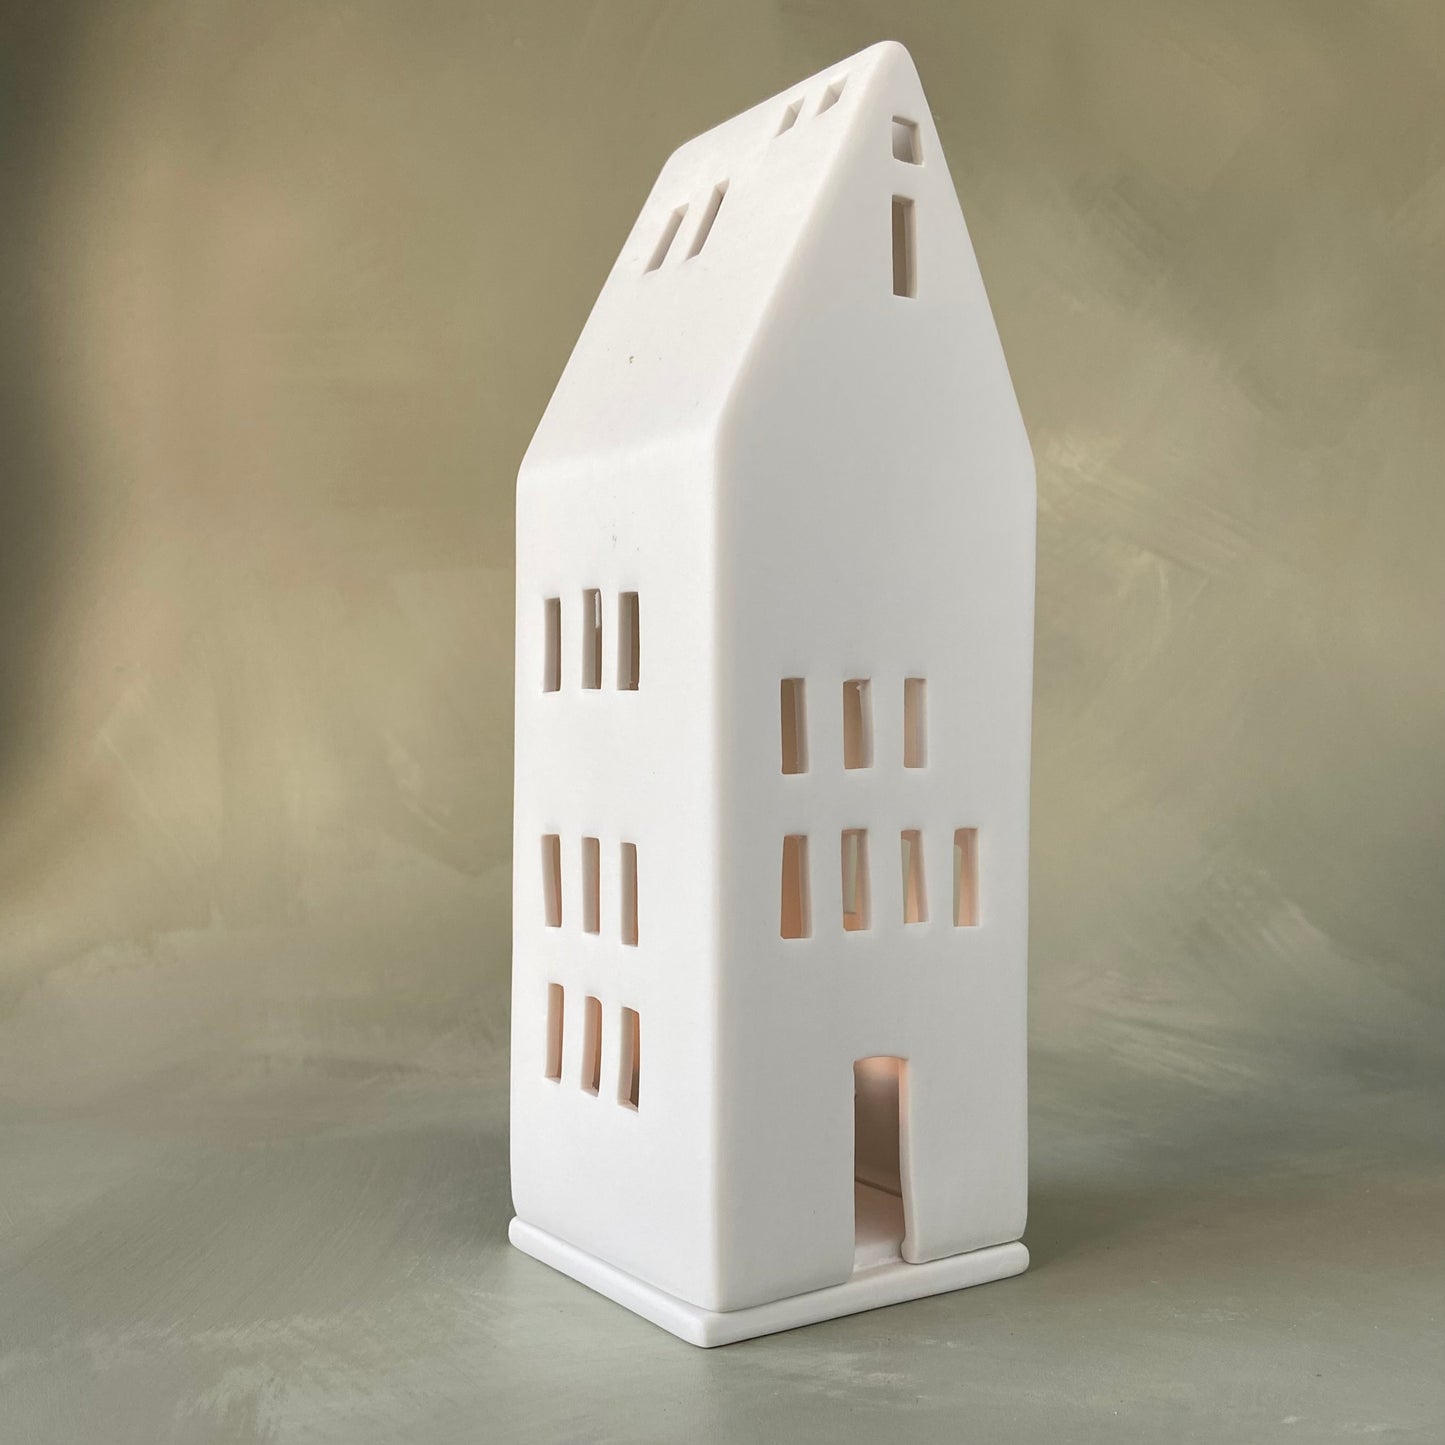 Porcelain Tealight House White with Large Windows